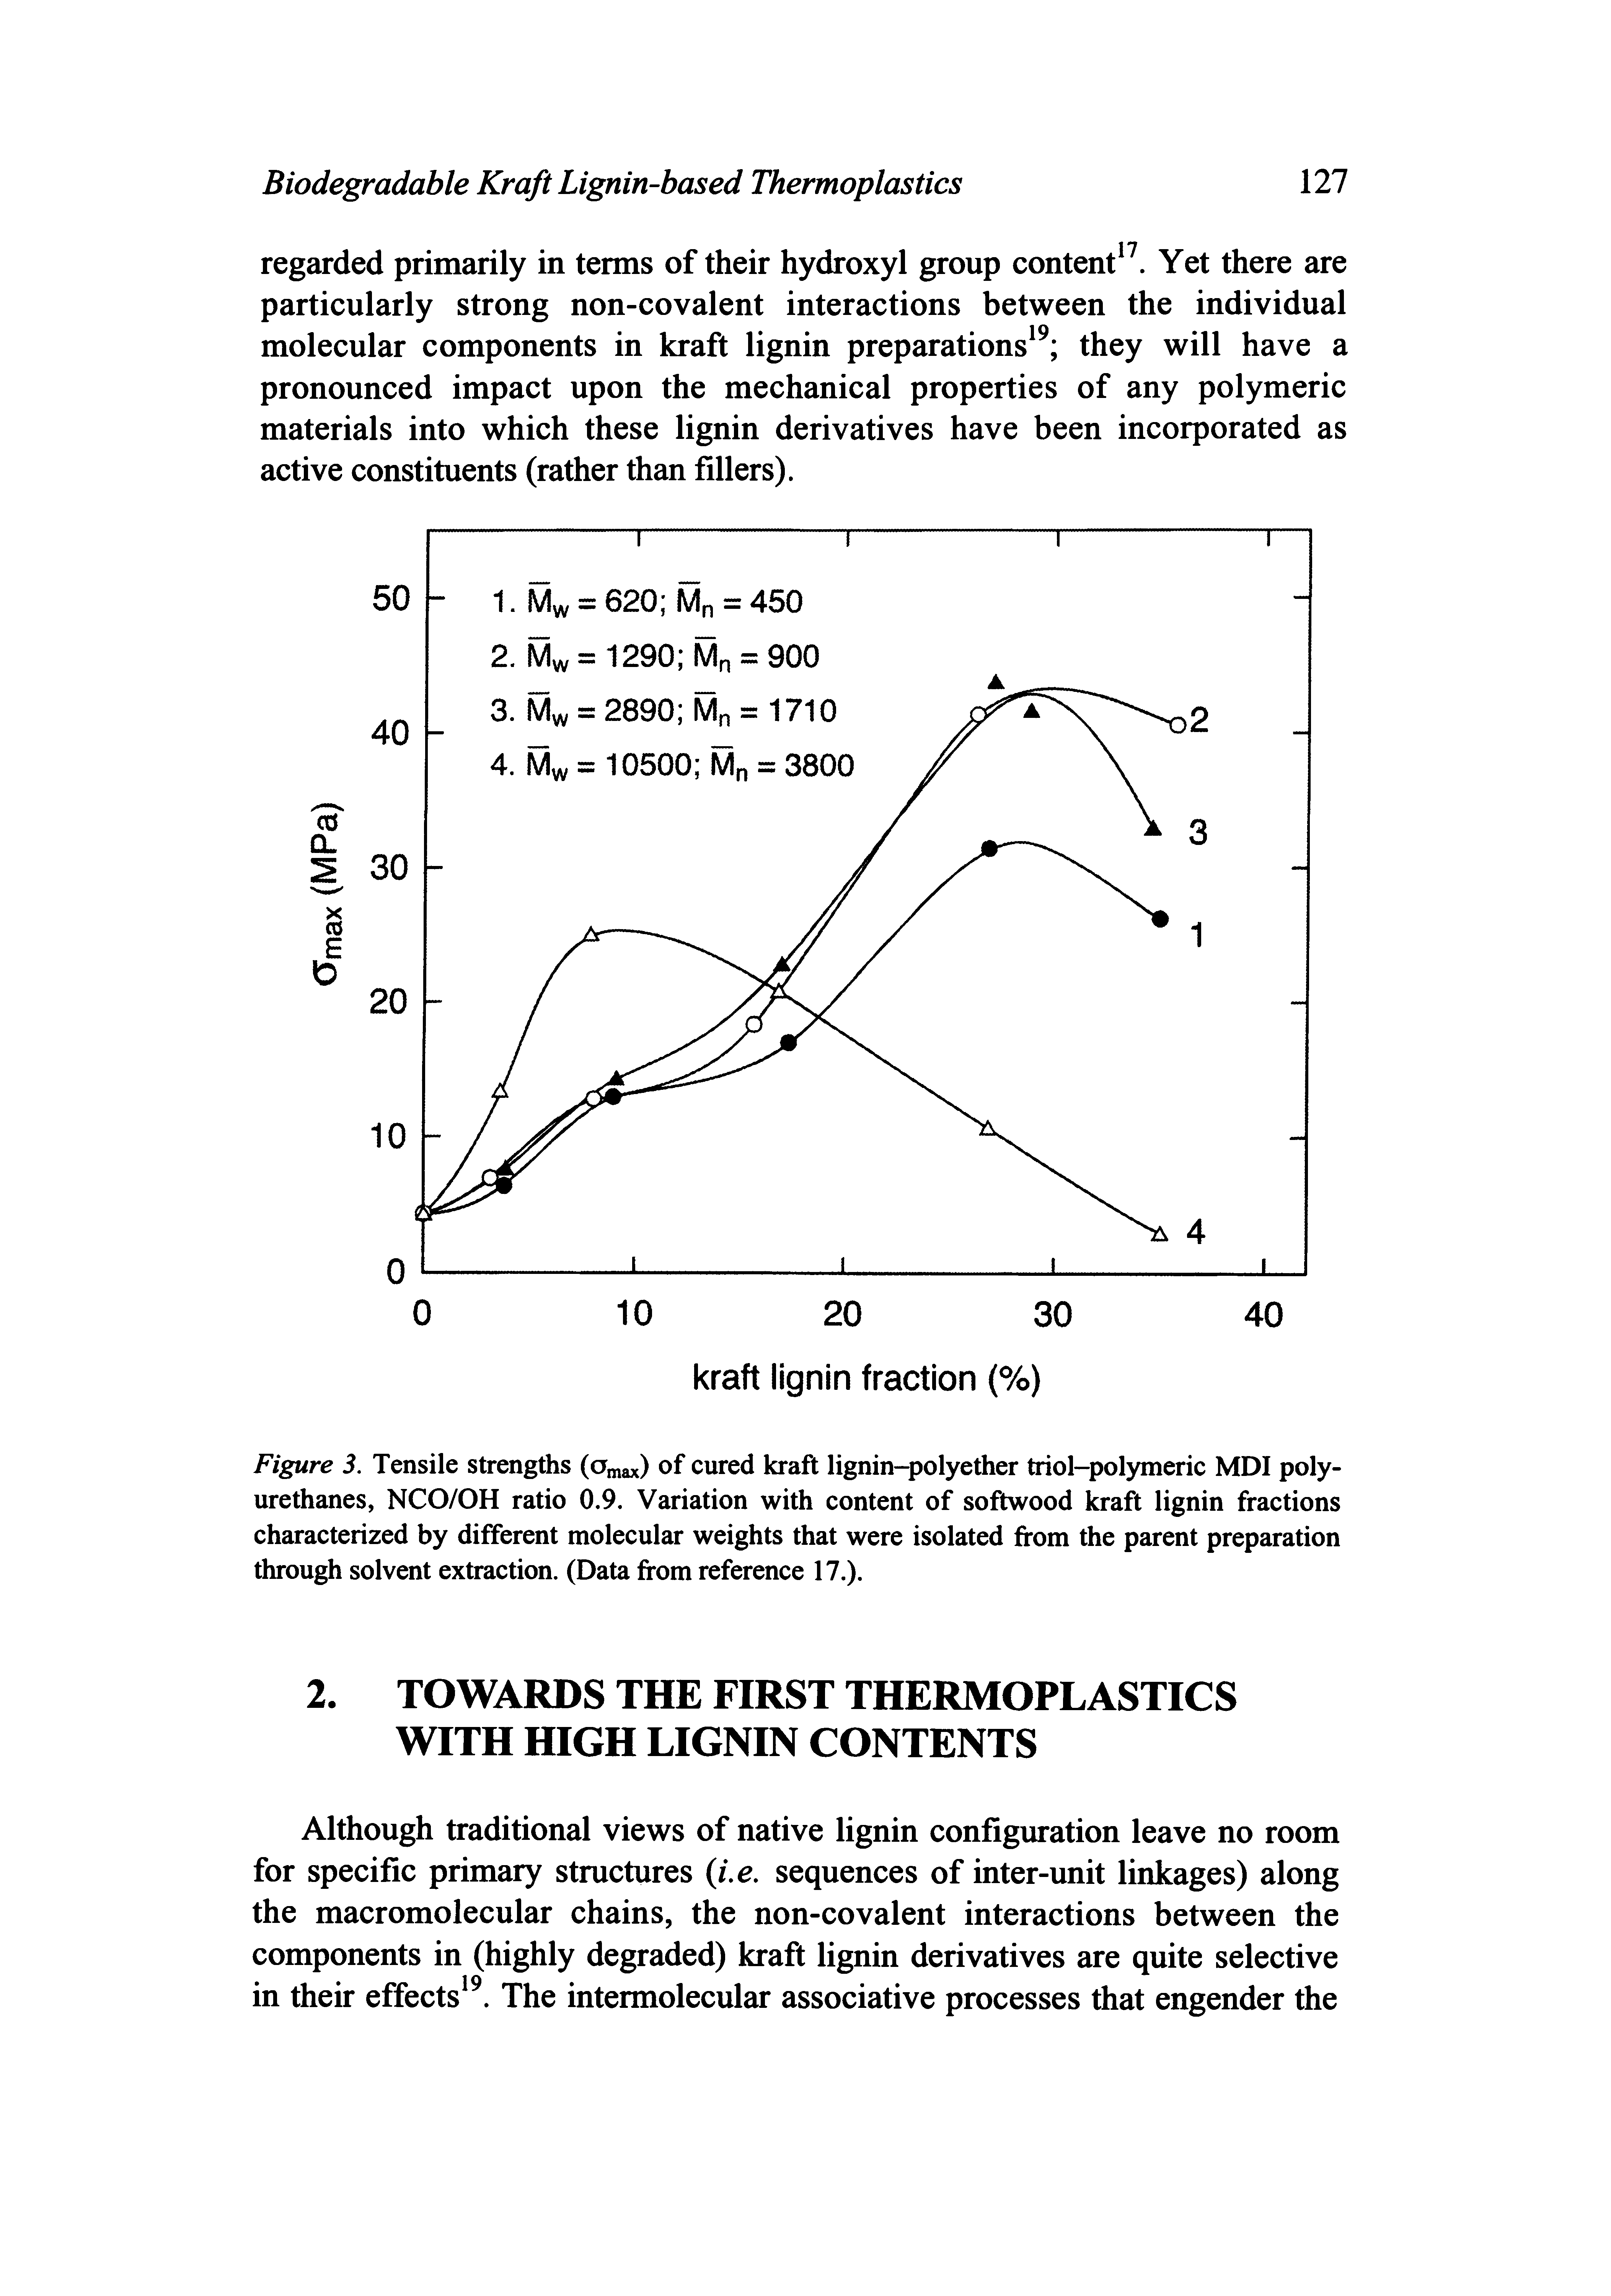 Figure 3. Tensile strengths (On x) of cured kraft lignin-polyether triol-polymeric MDI polyurethanes, NCO/OH ratio 0.9. Variation with content of softwood kraft lignin fractions characterized by different molecular weights that were isolated from the parent preparation through solvent extraction. (Data from reference 17.).